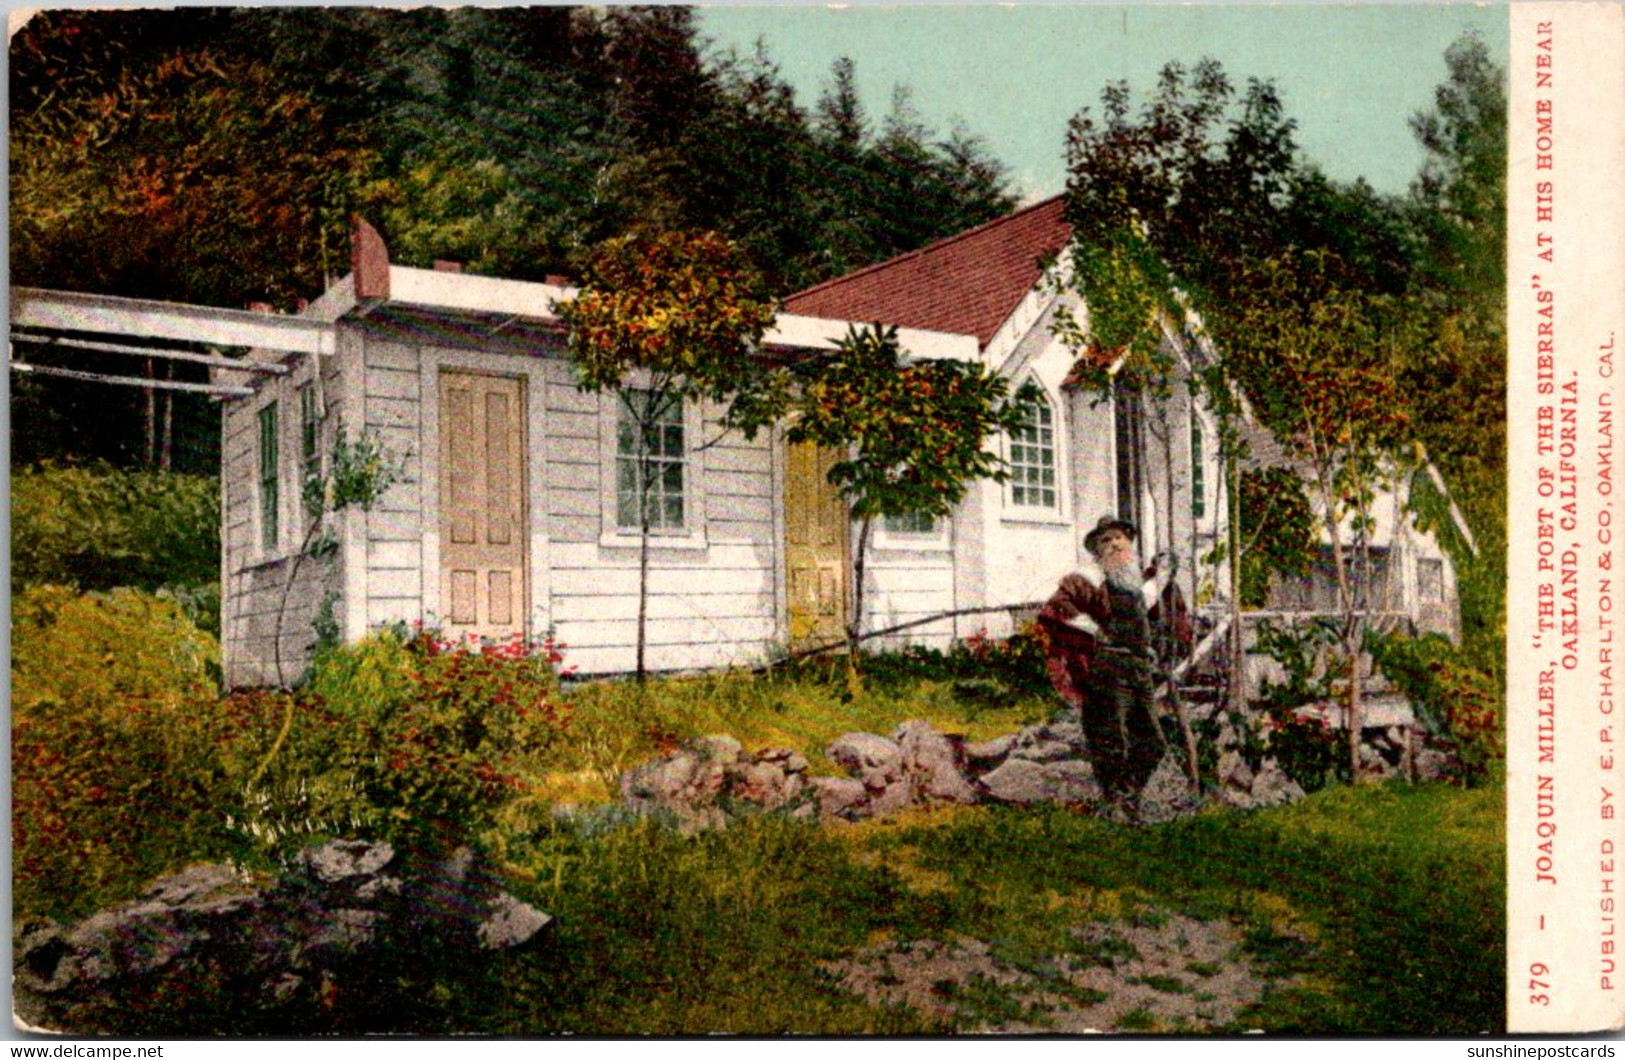 California Oakland Joaquin Miller "The Poet Of The Sierras" At His House - Oakland